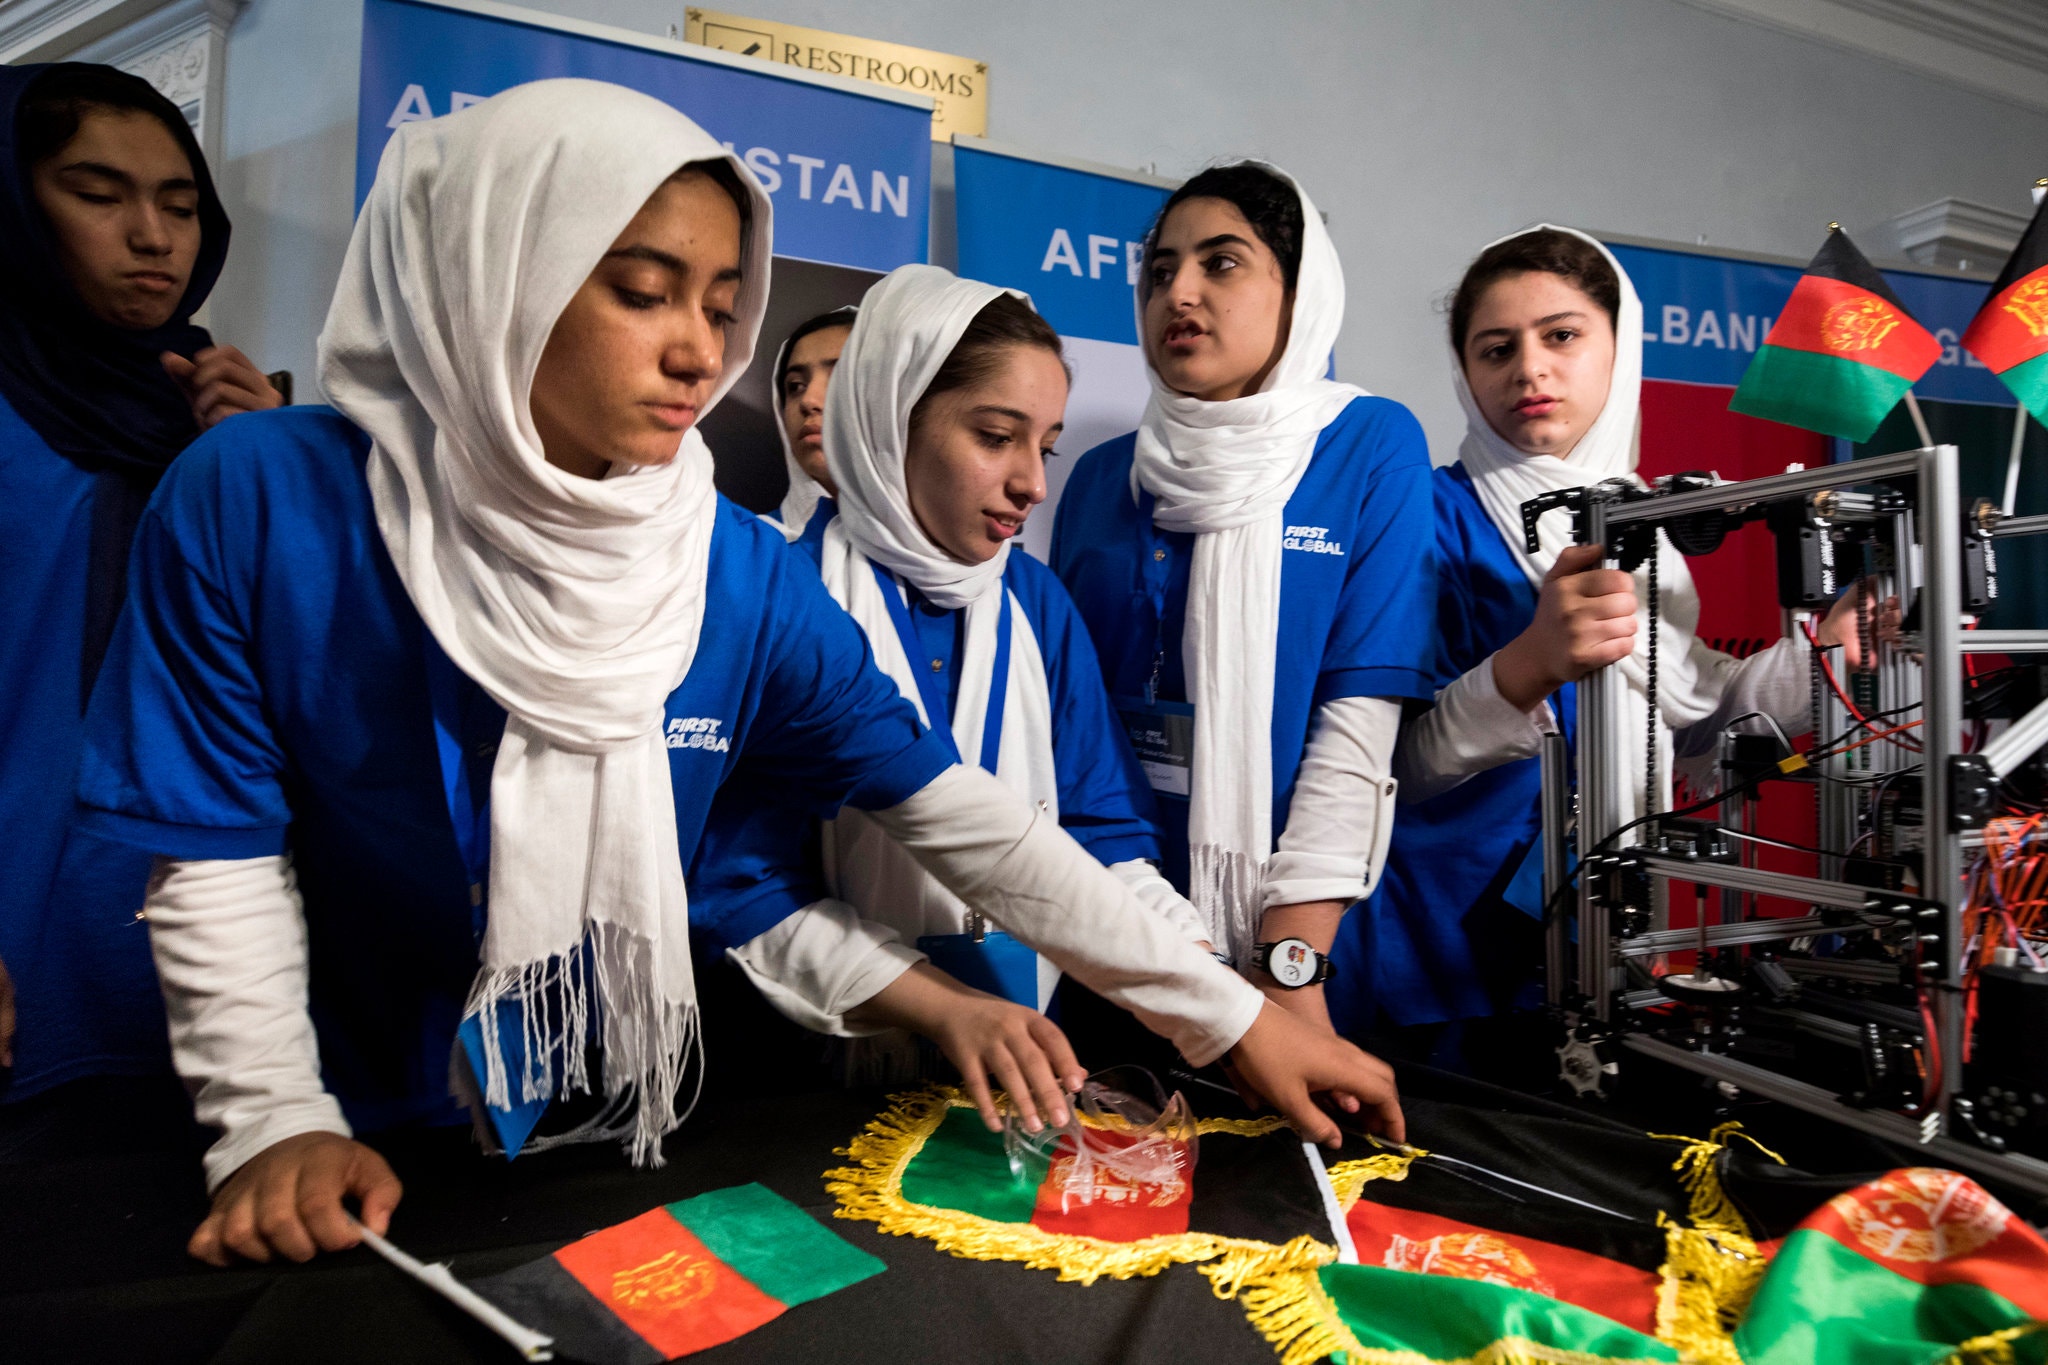 The team first came to international attention in 2017 when they were twice refused visas to enter the U.S. for a robotics competition. After an international outcry, the President intervened and let them in. The team won an award in November of the same year at a major competition in Estonia.